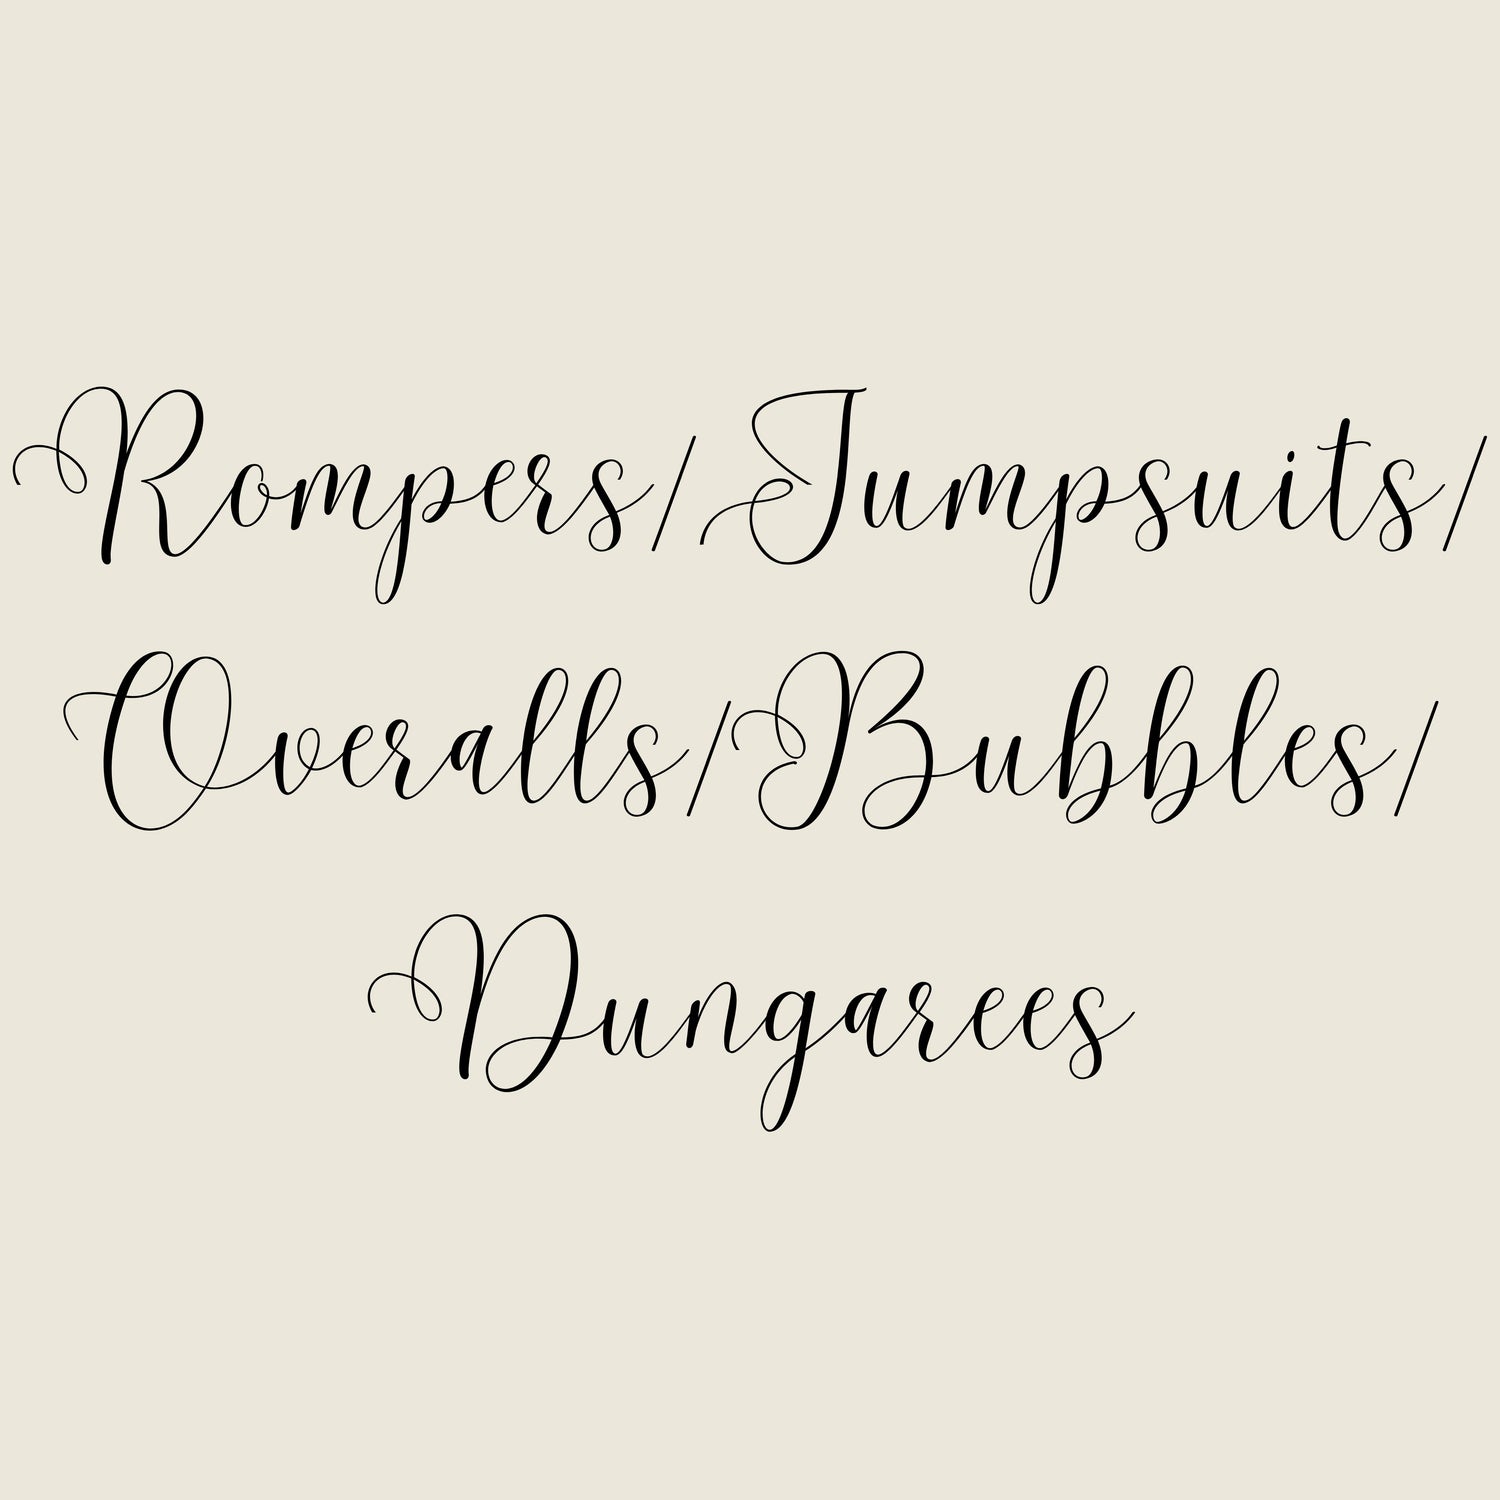 Rompers/ Jumpsuits/ Overalls/ Bubbles/ Dungarees